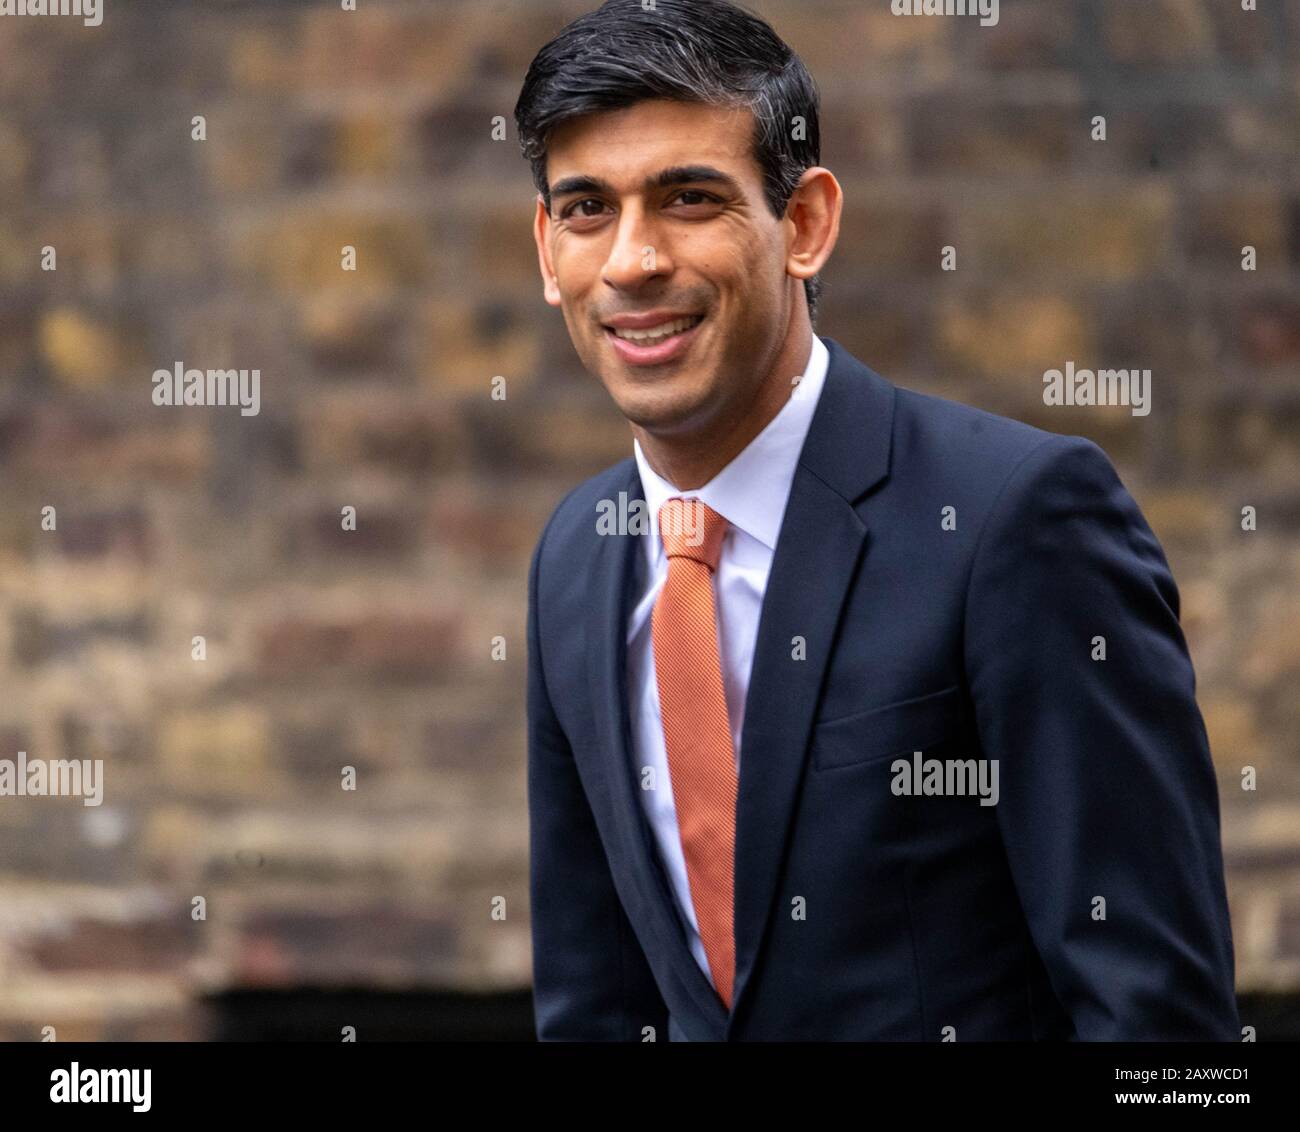 London, UK. 13th Feb, 2020. Rt Hon Rishi Sunak MP arrives to be appointed as the Chancellor of the Exchequer 10 Downing Street, London following the surprise resignation of Sajid Javid, as part of the cabinet reshuffle Credit: Ian Davidson/Alamy Live News Stock Photo